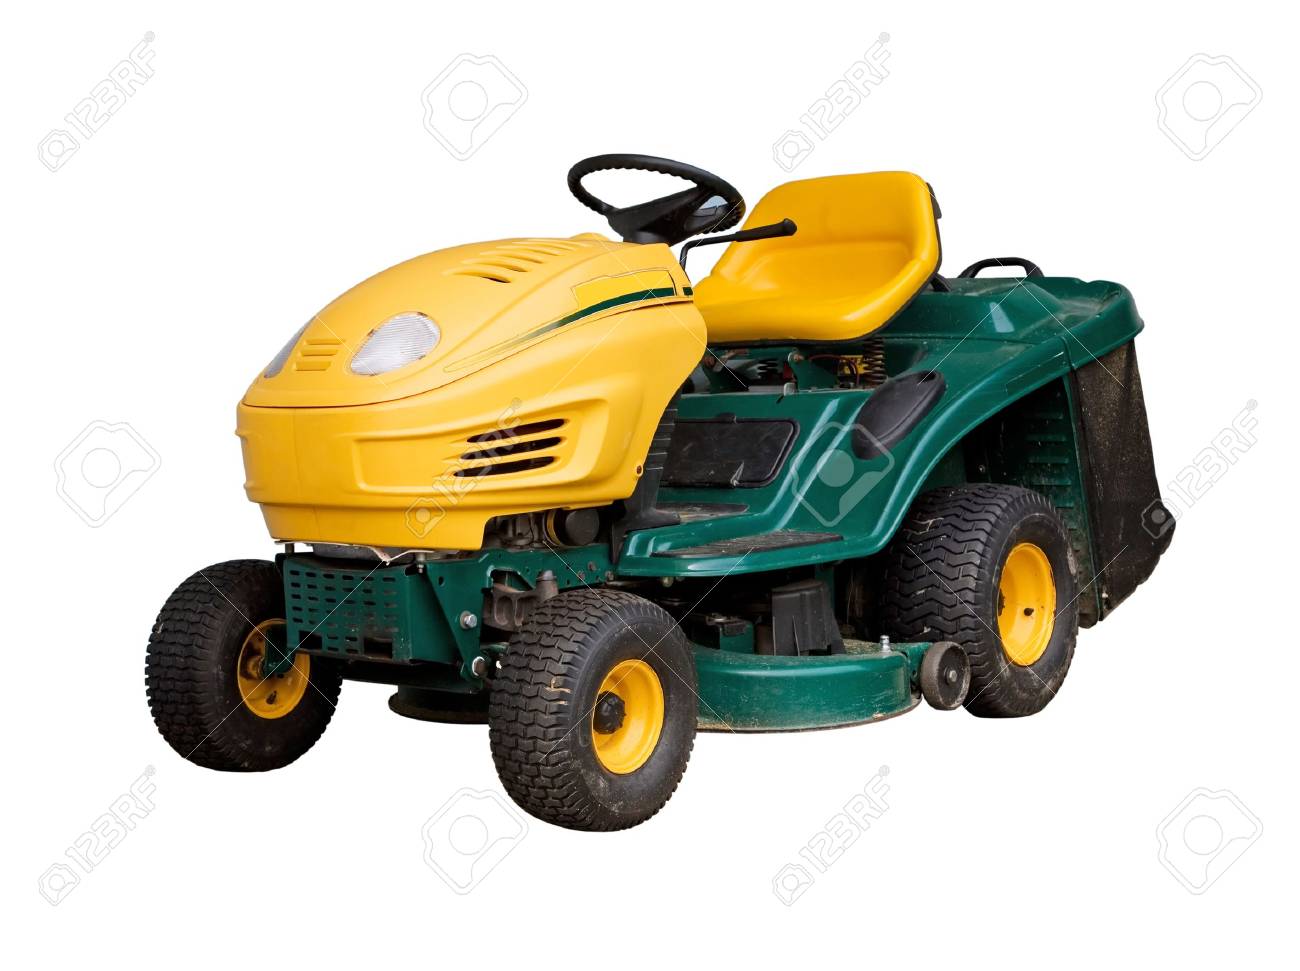 Mowing Machine Isolated On White Background Stock Photo Picture